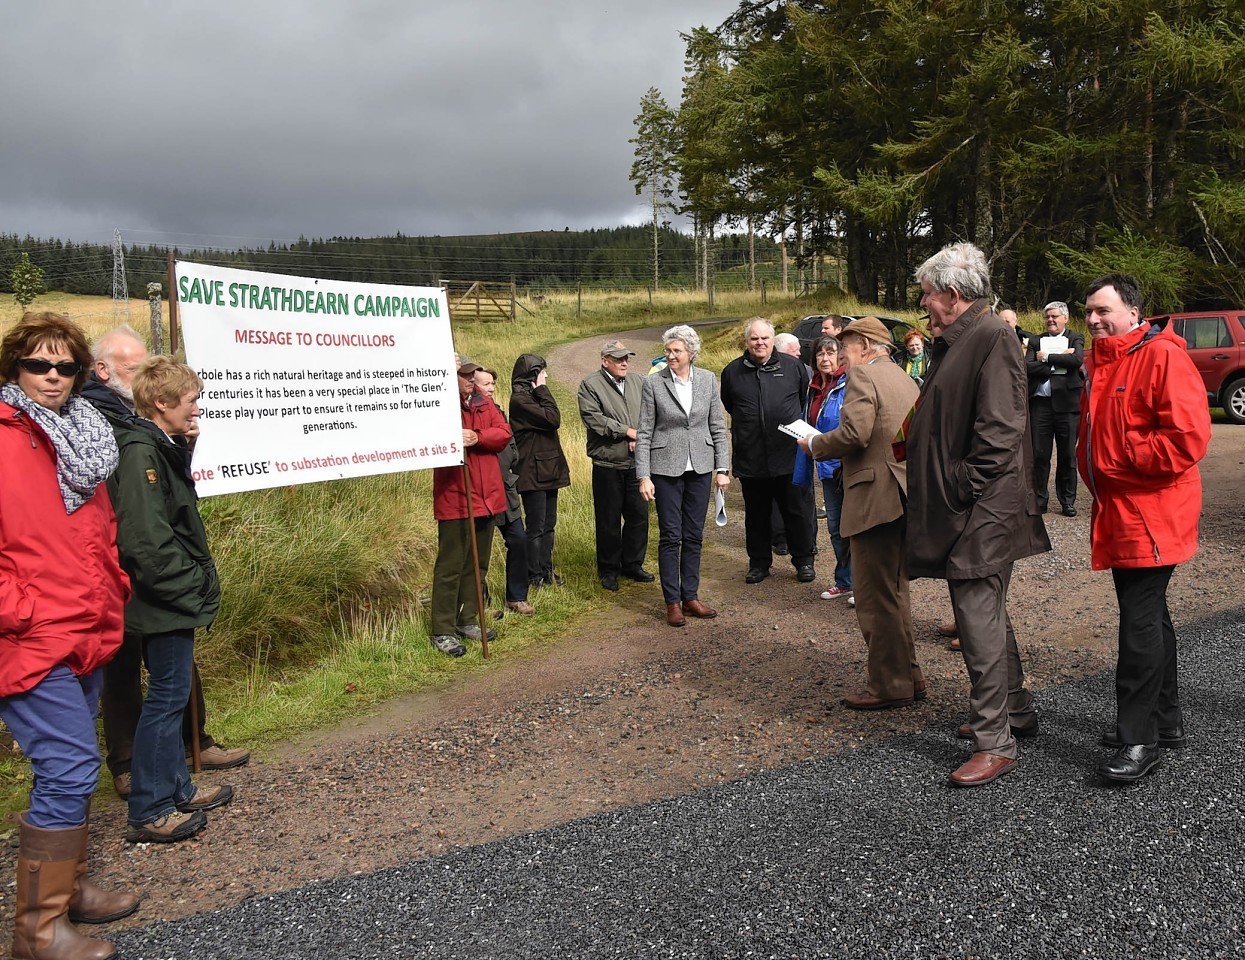 Campaigners meet councillors on the substation site visit